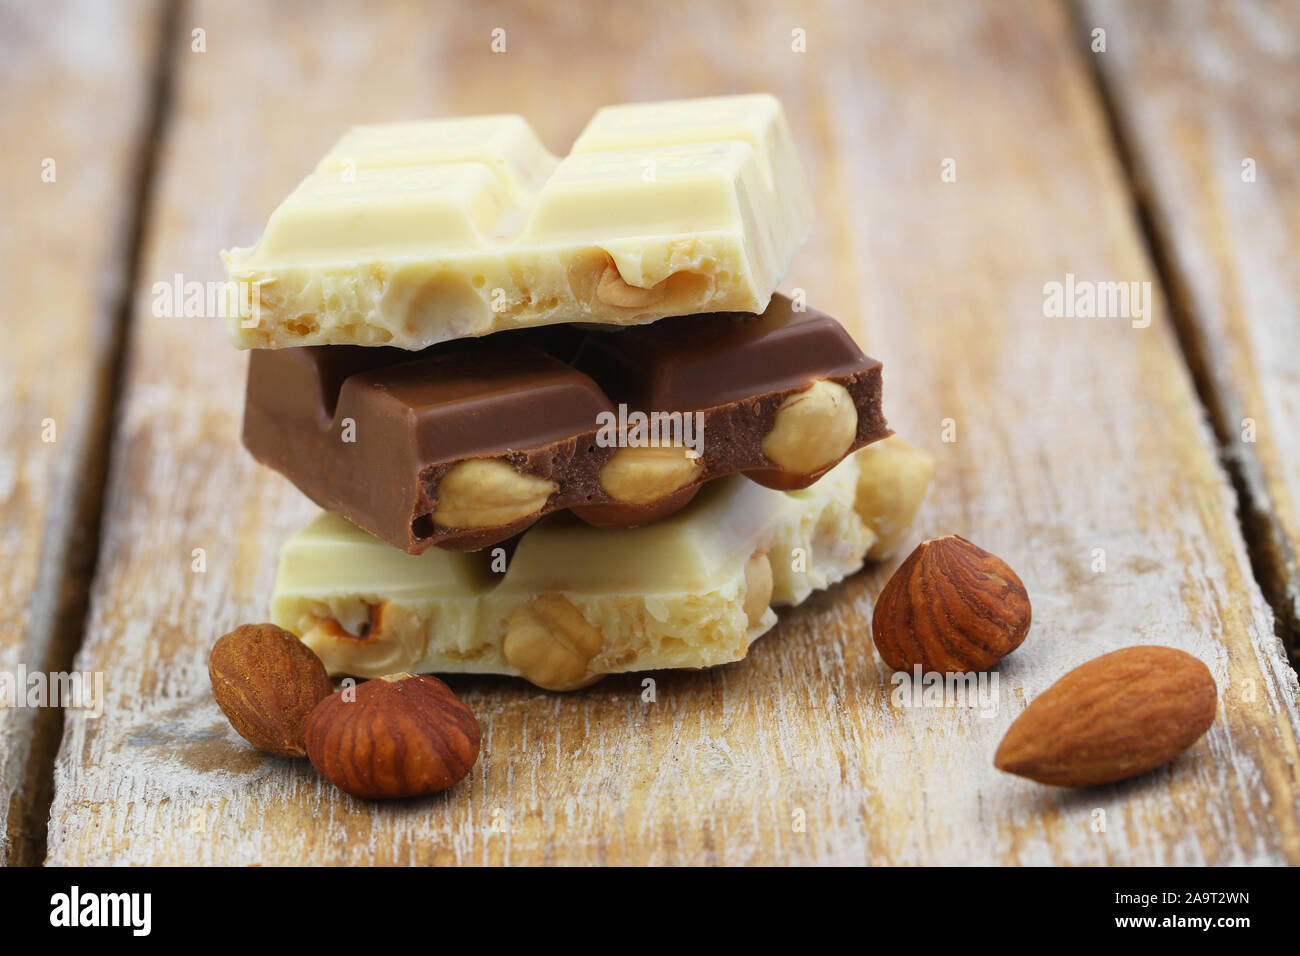 Pieces of white and milk chocolates with almonds and hazelnuts stacked up on wooden surface Stock Photo